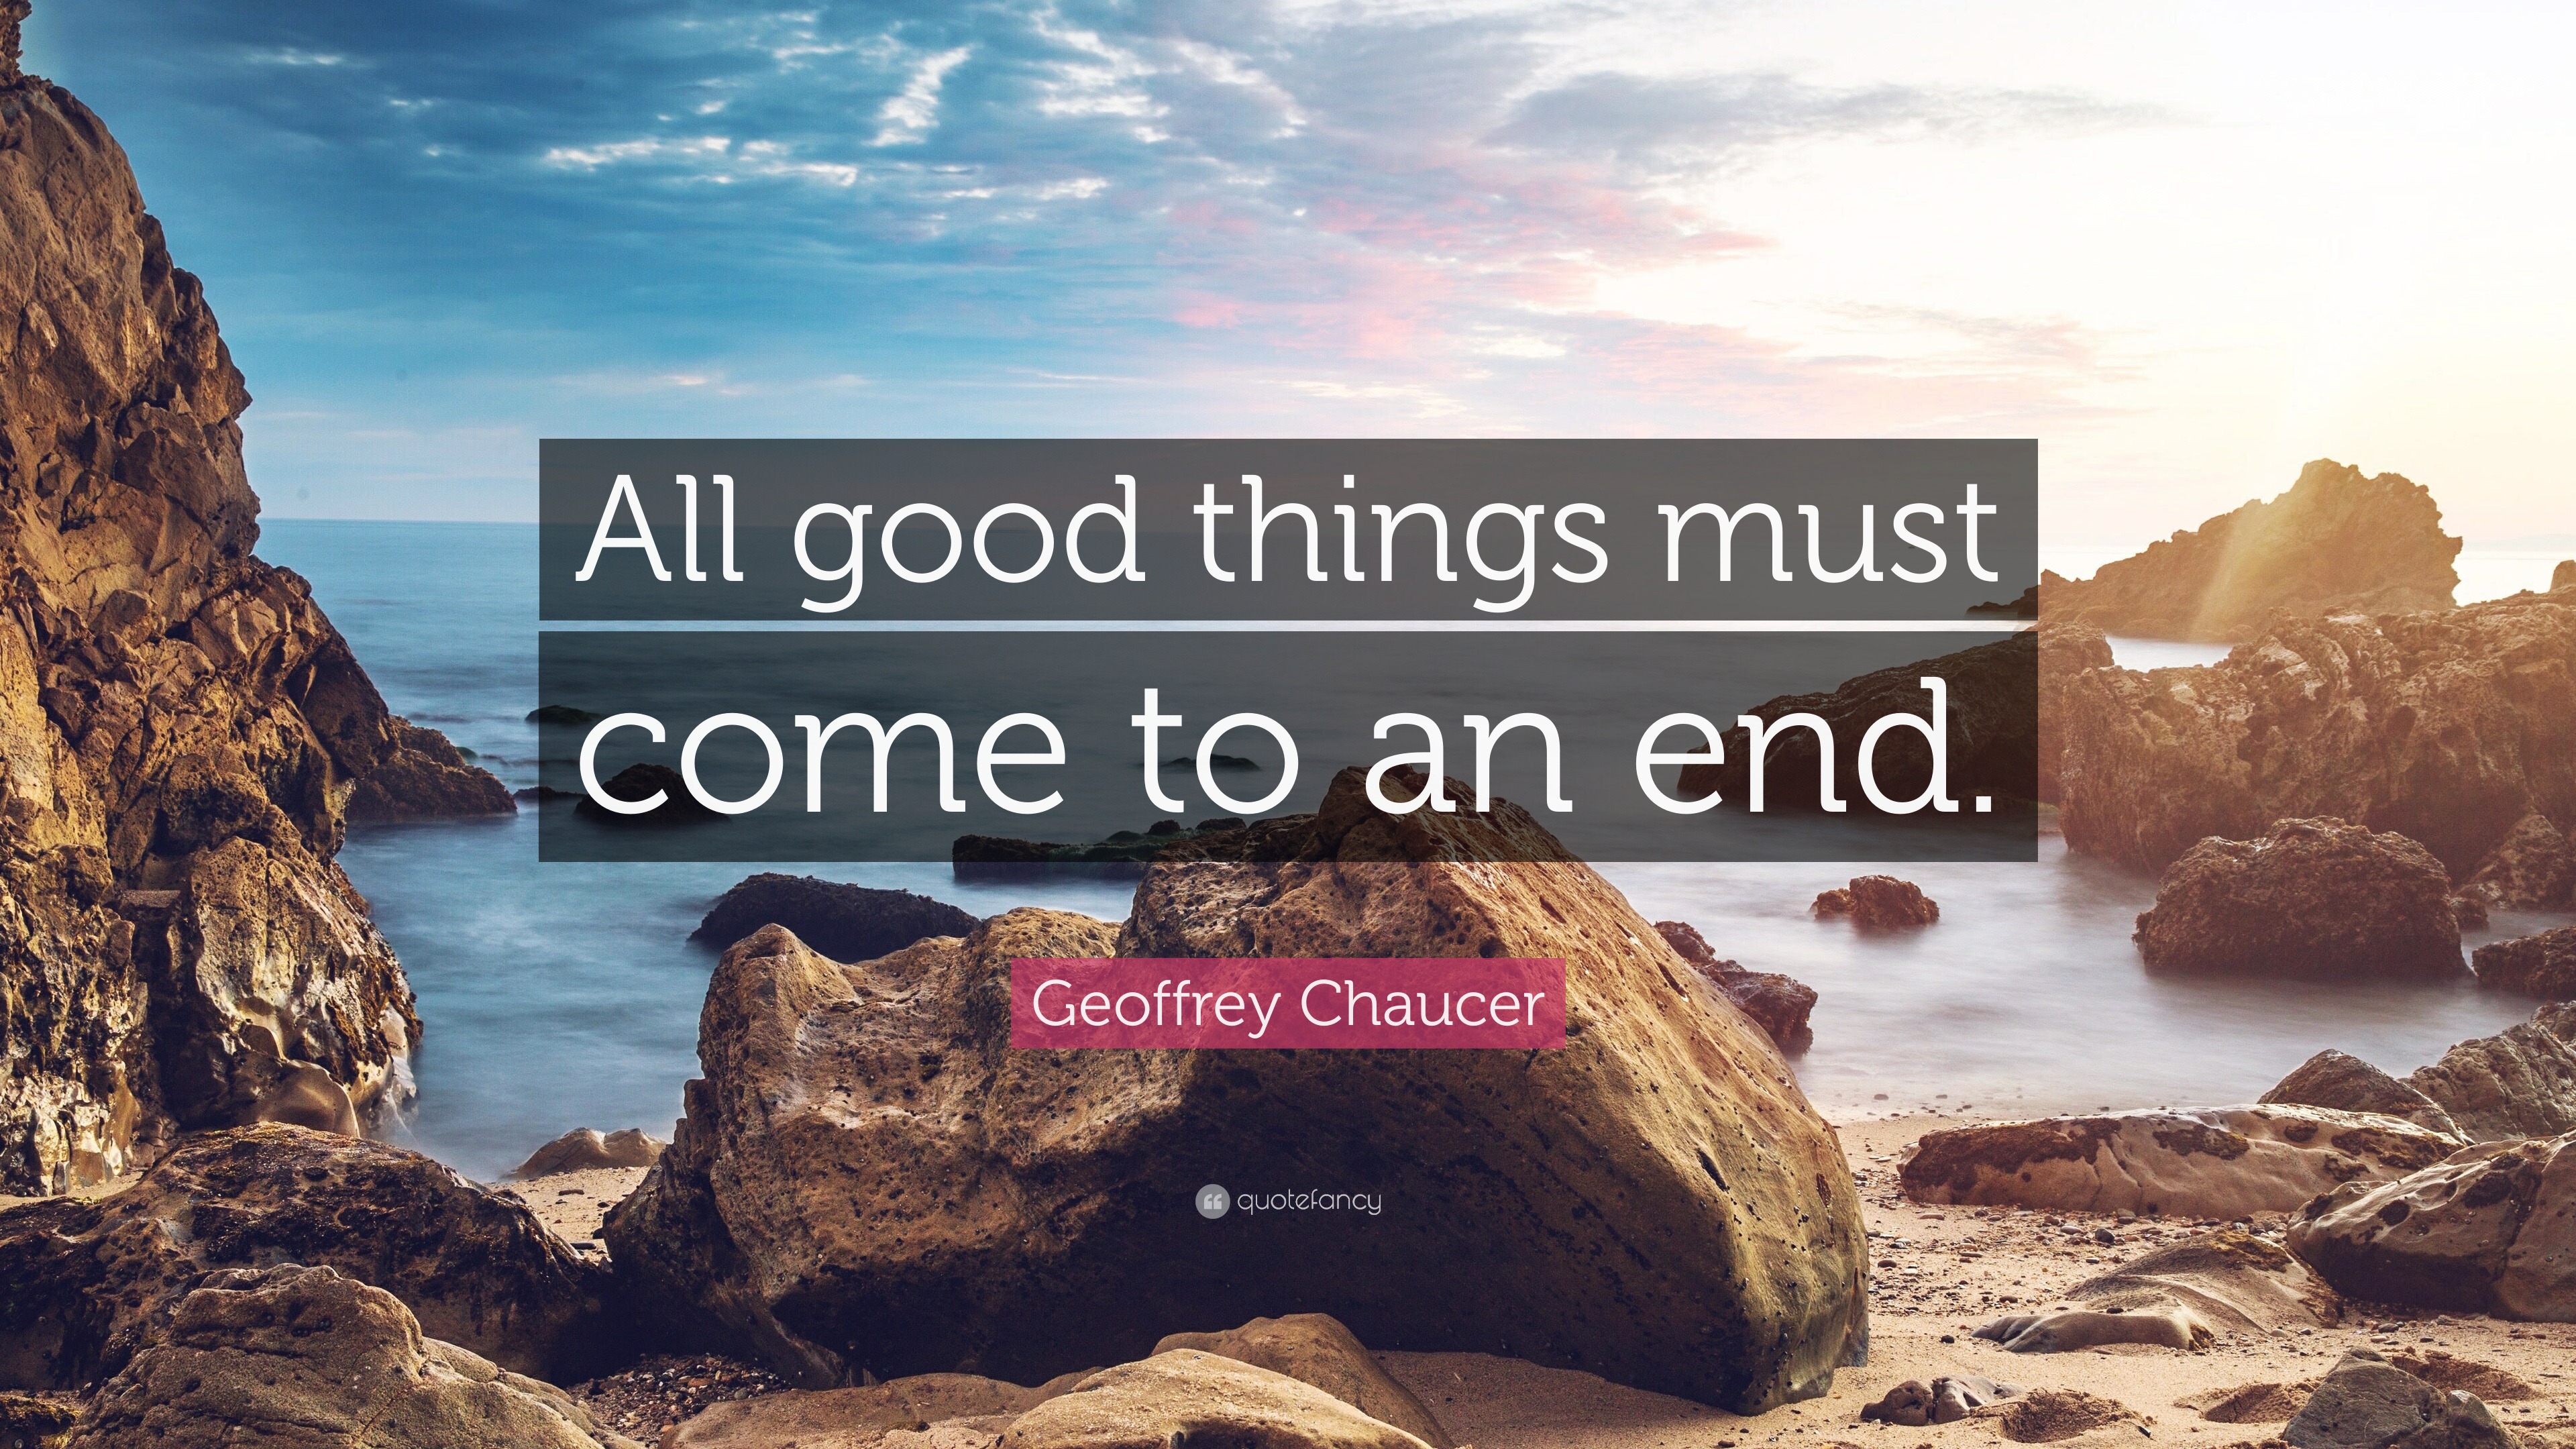 Geoffrey Chaucer Quote: “All good things must come to an end.” (12